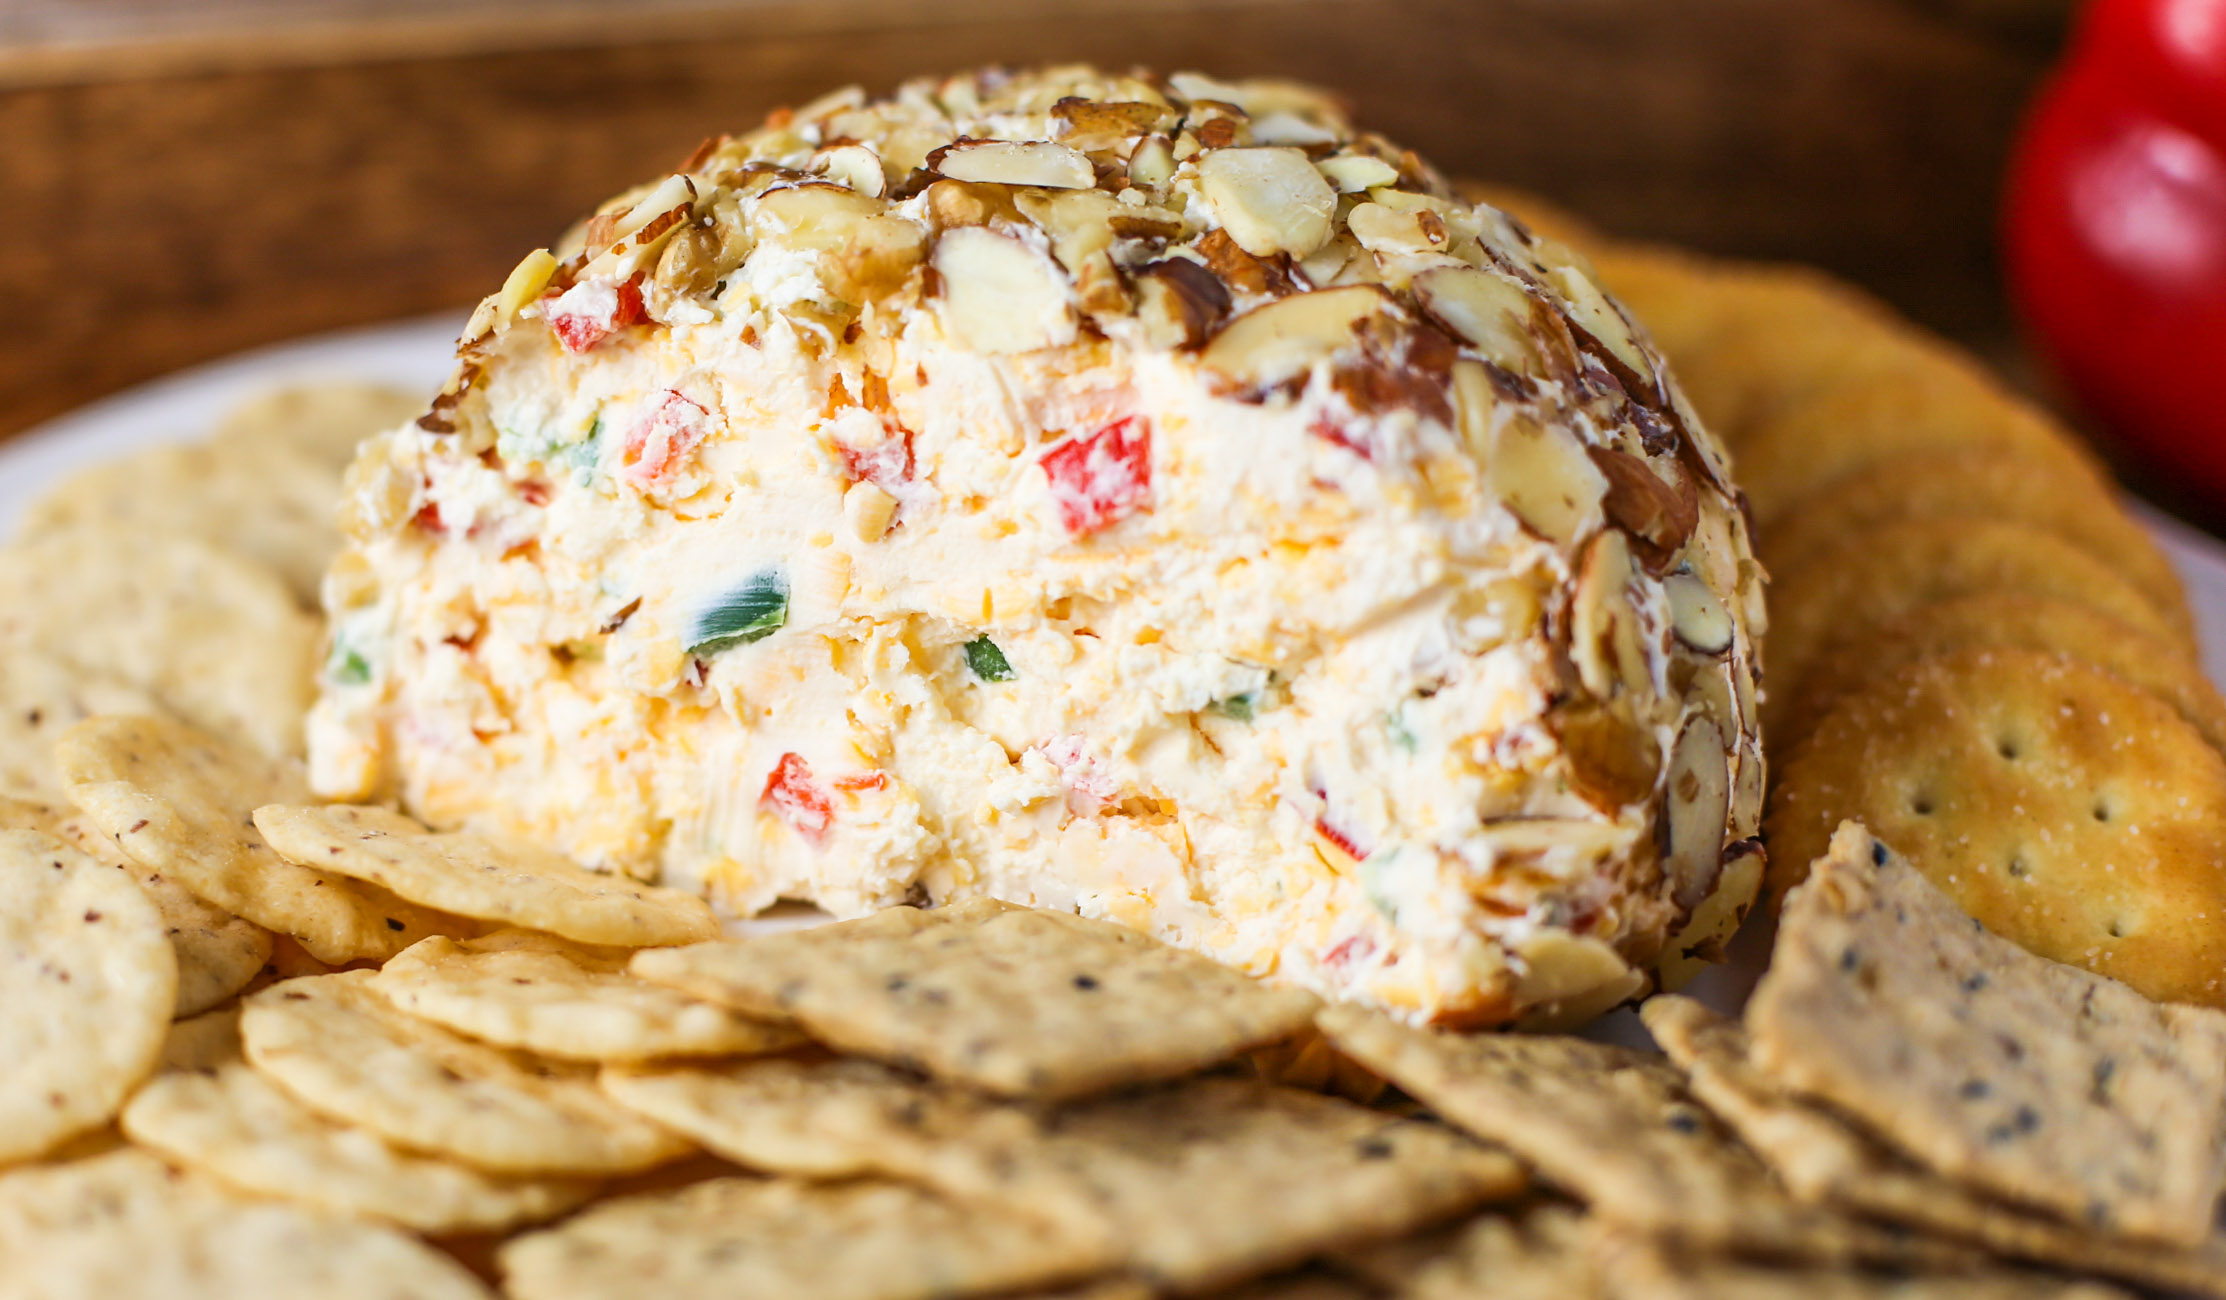 Jalapeno and Red Pepper Cheese Ball